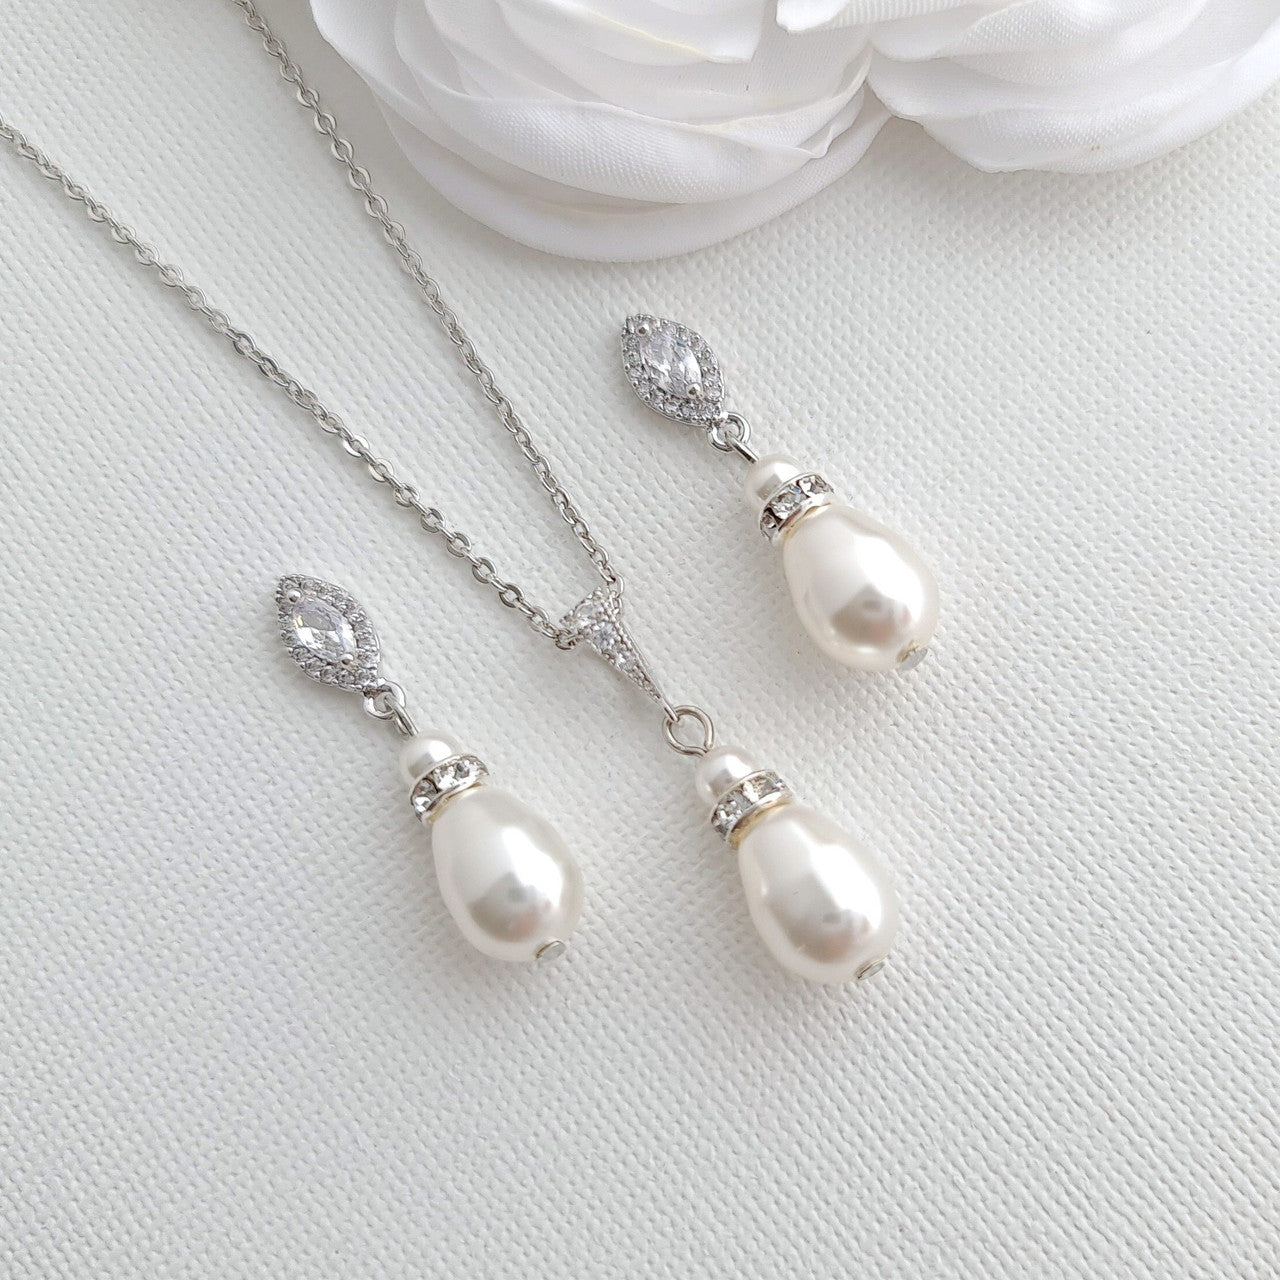 Pearl Jewellery Set with Teardrop Pearl Pendant and Earrings for Brides- Ella